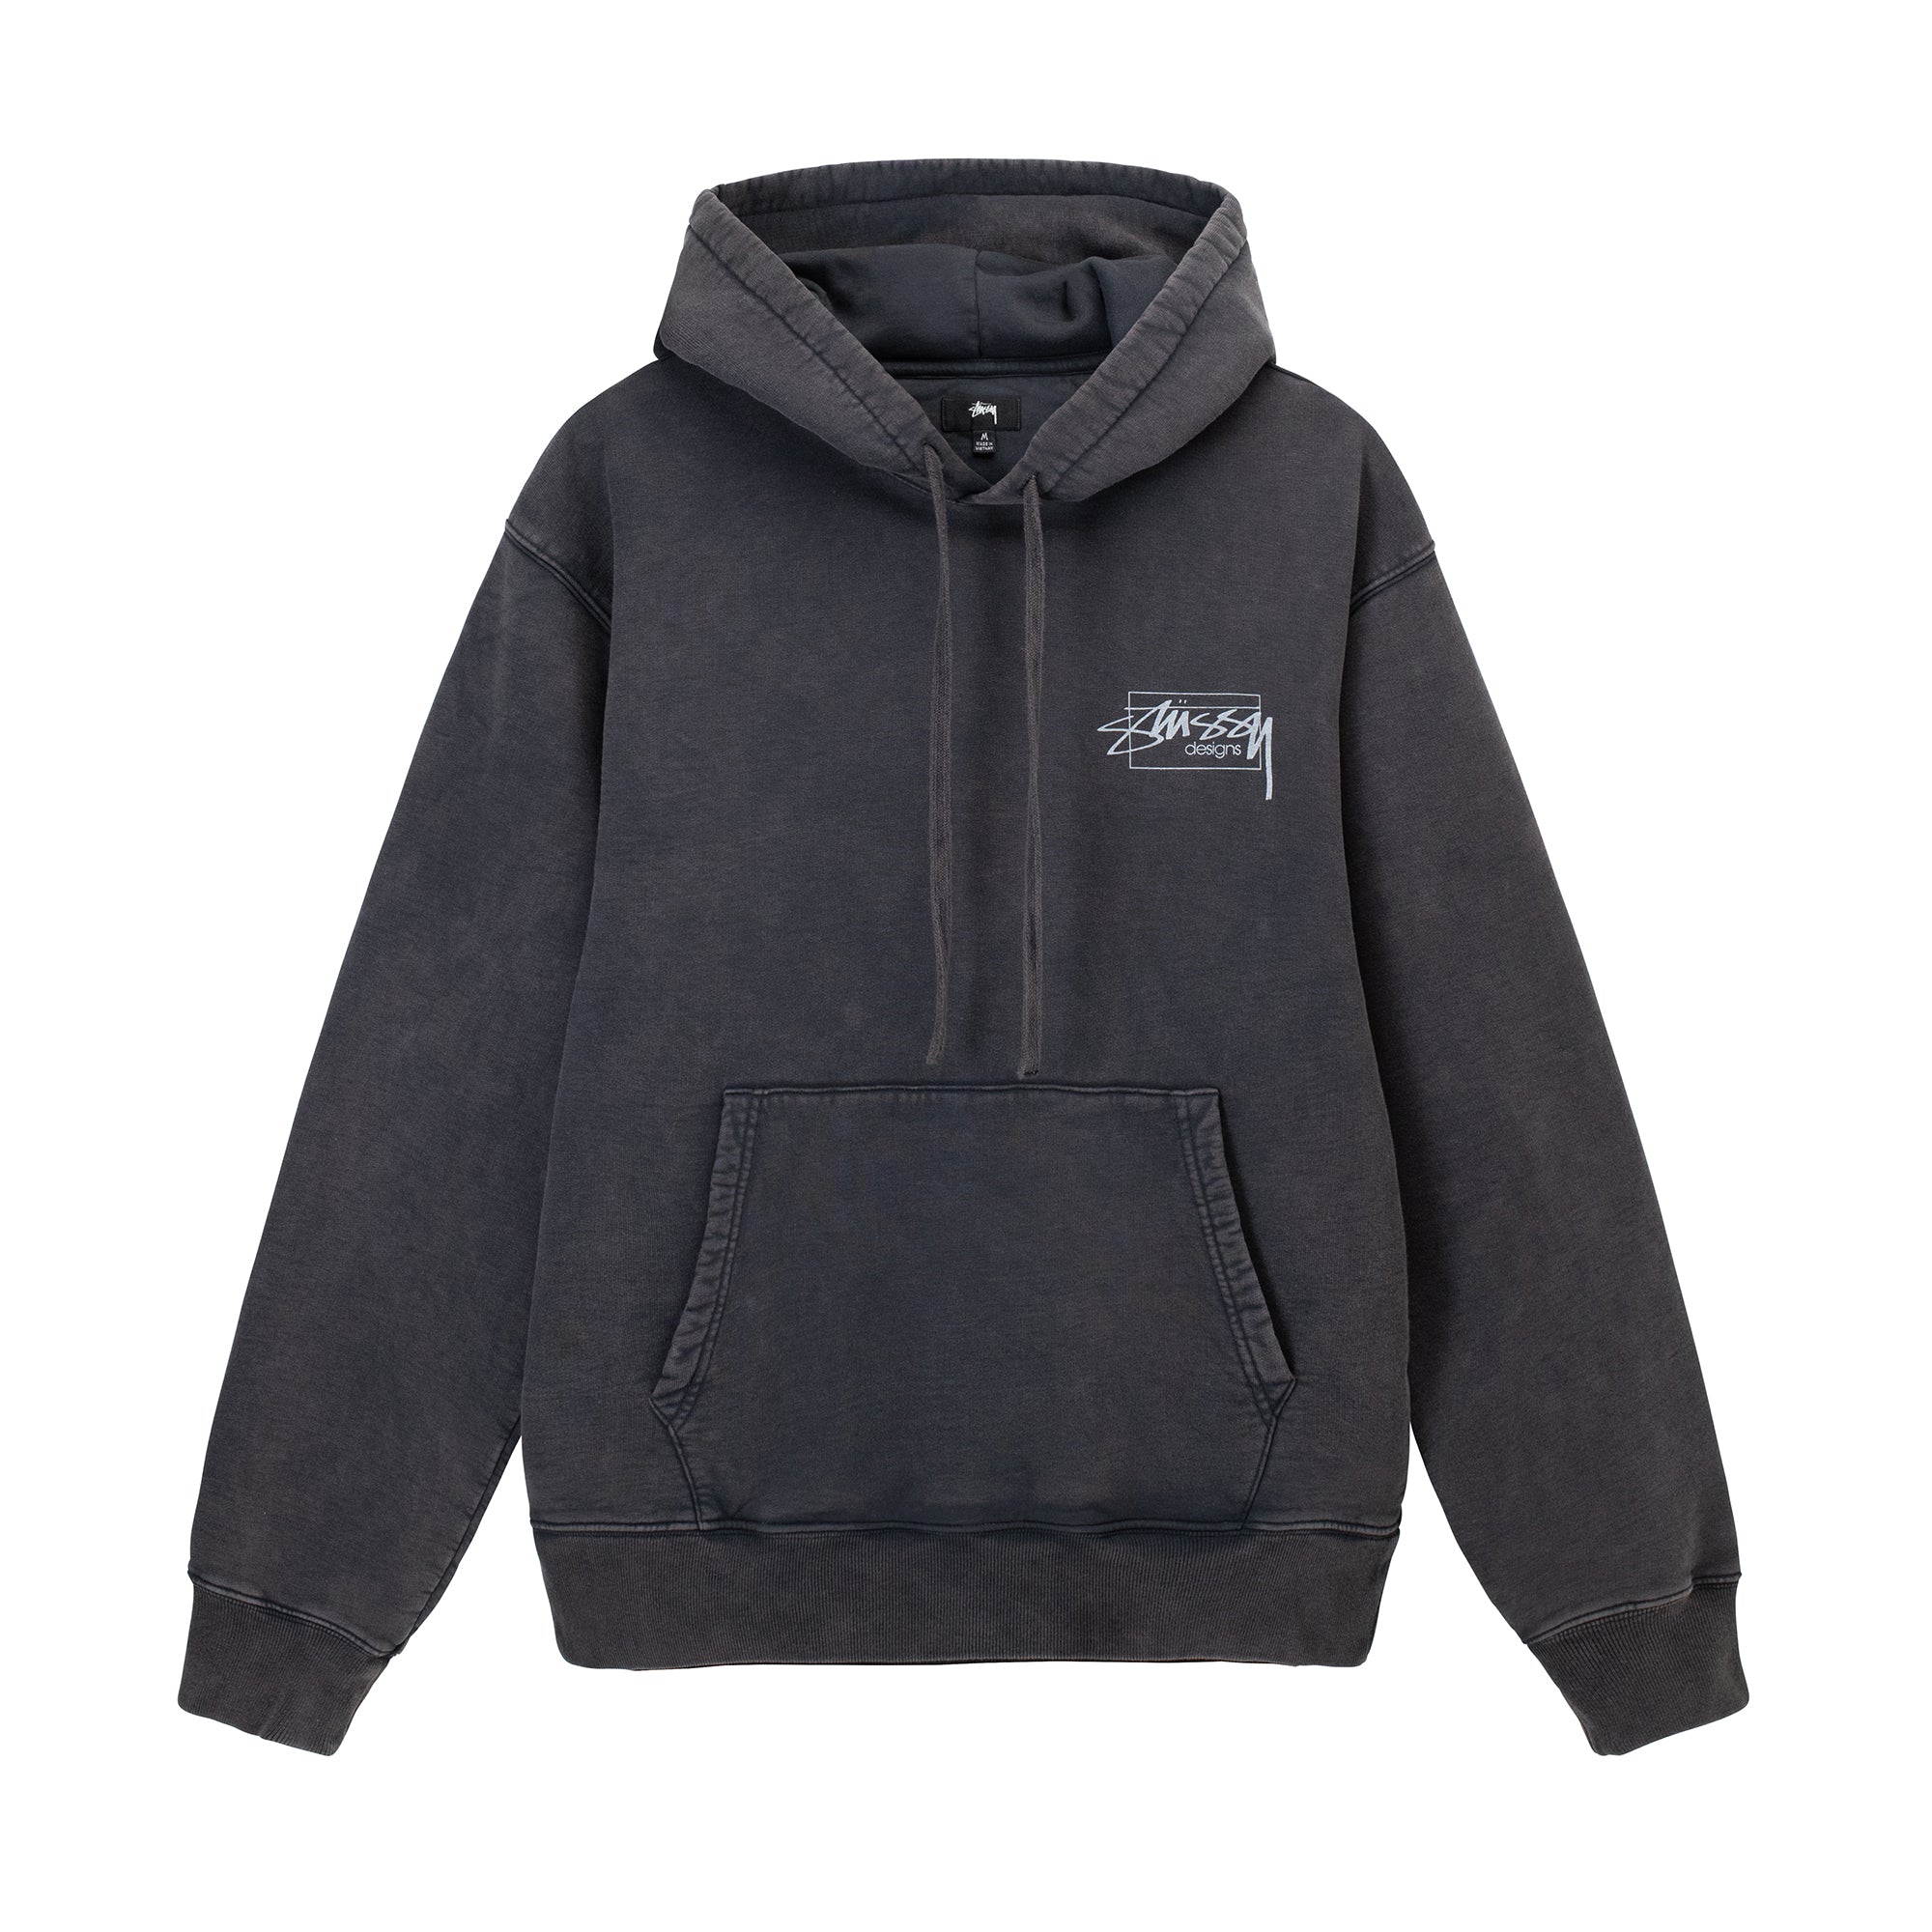 Stussy】x Dover Street Market Hoodie Black & grey available ✓